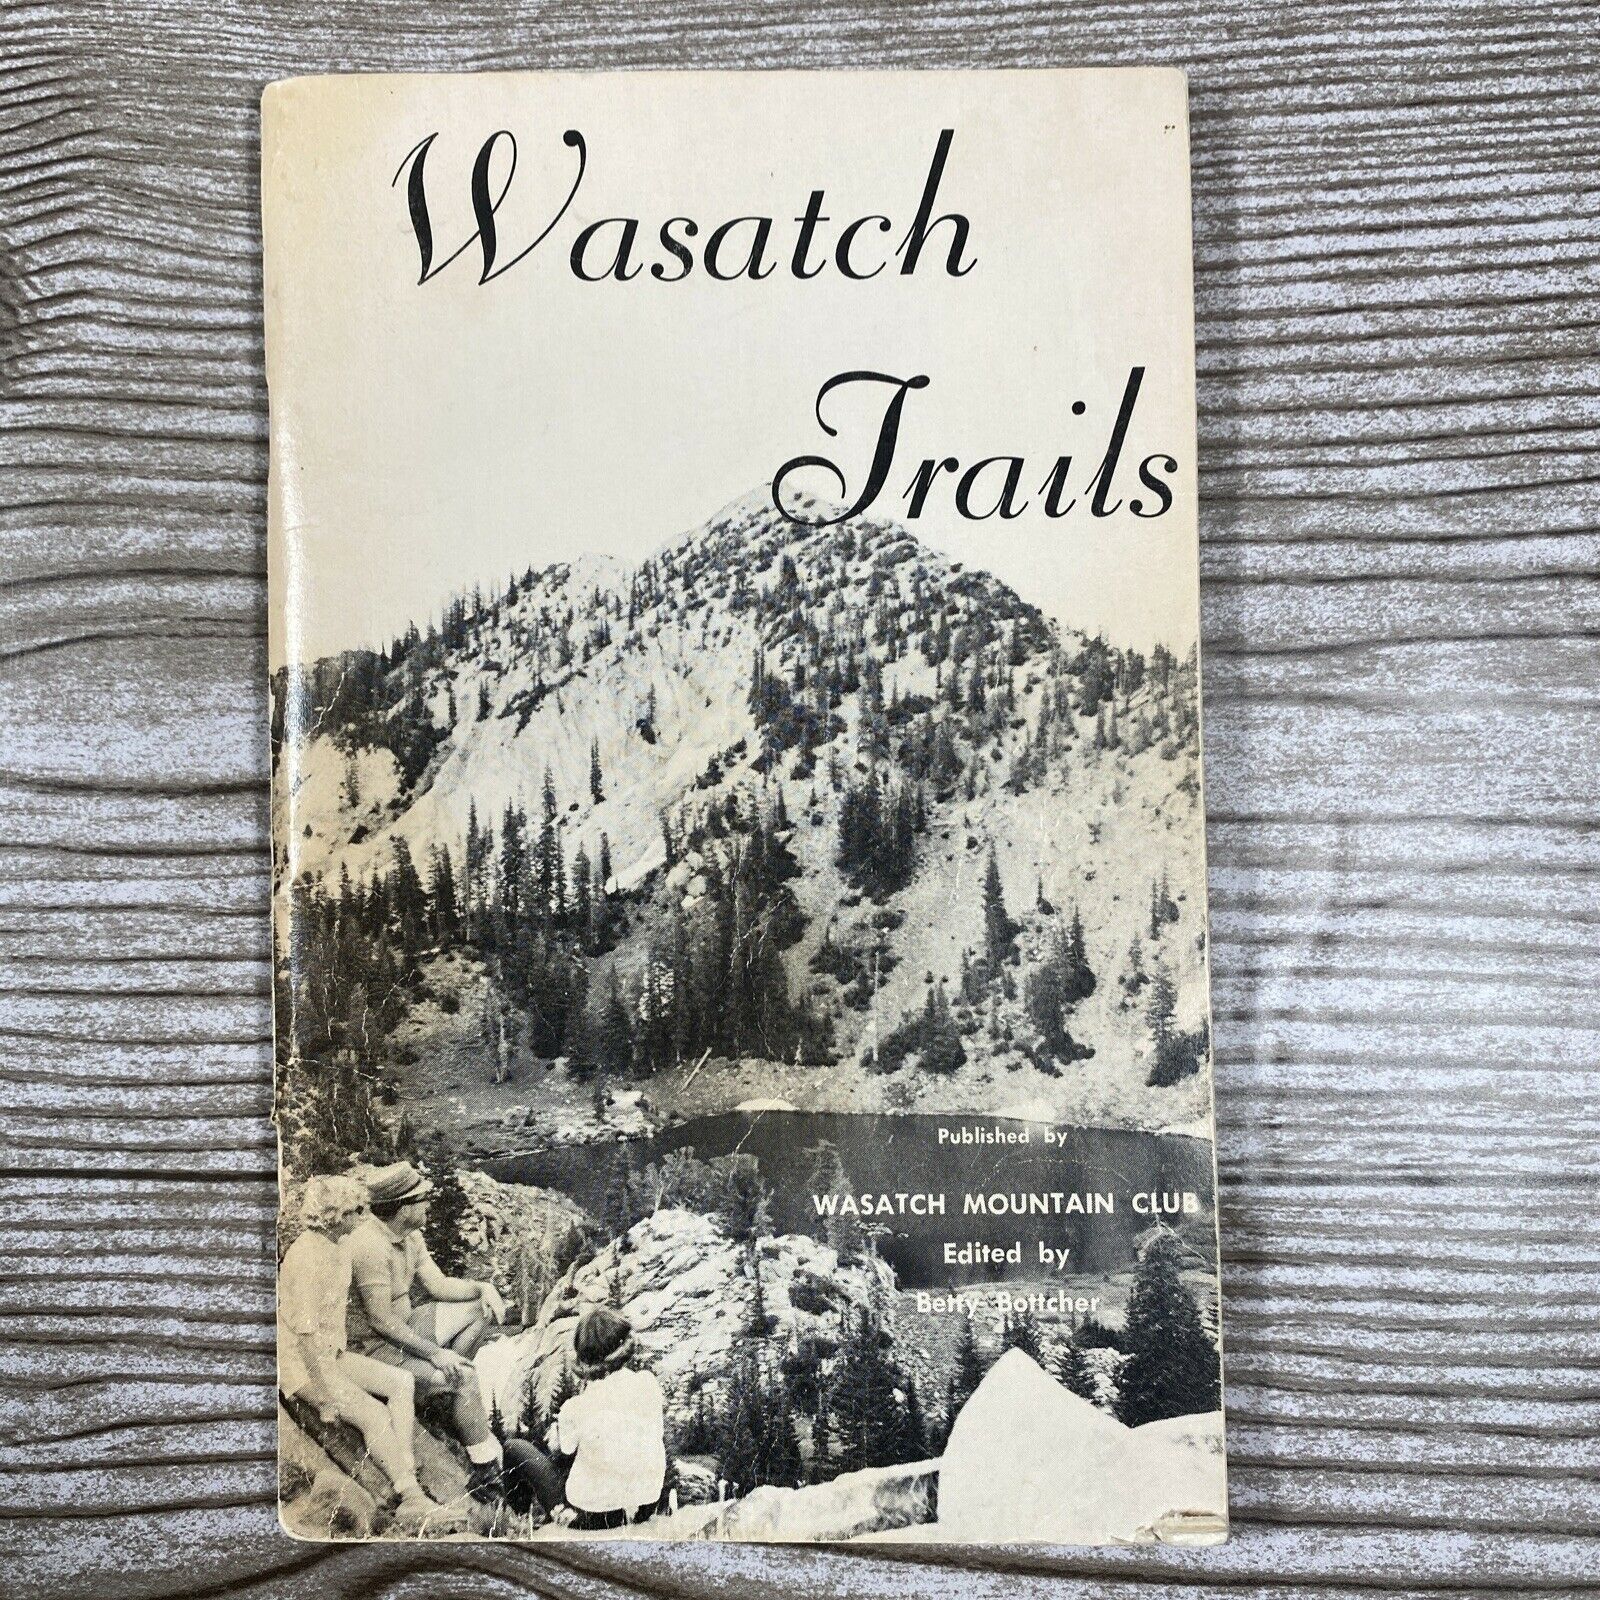 Vintage Wasatch Trails Book 1973 Utah Edited By Betty Bottcher Mountain Club Slc